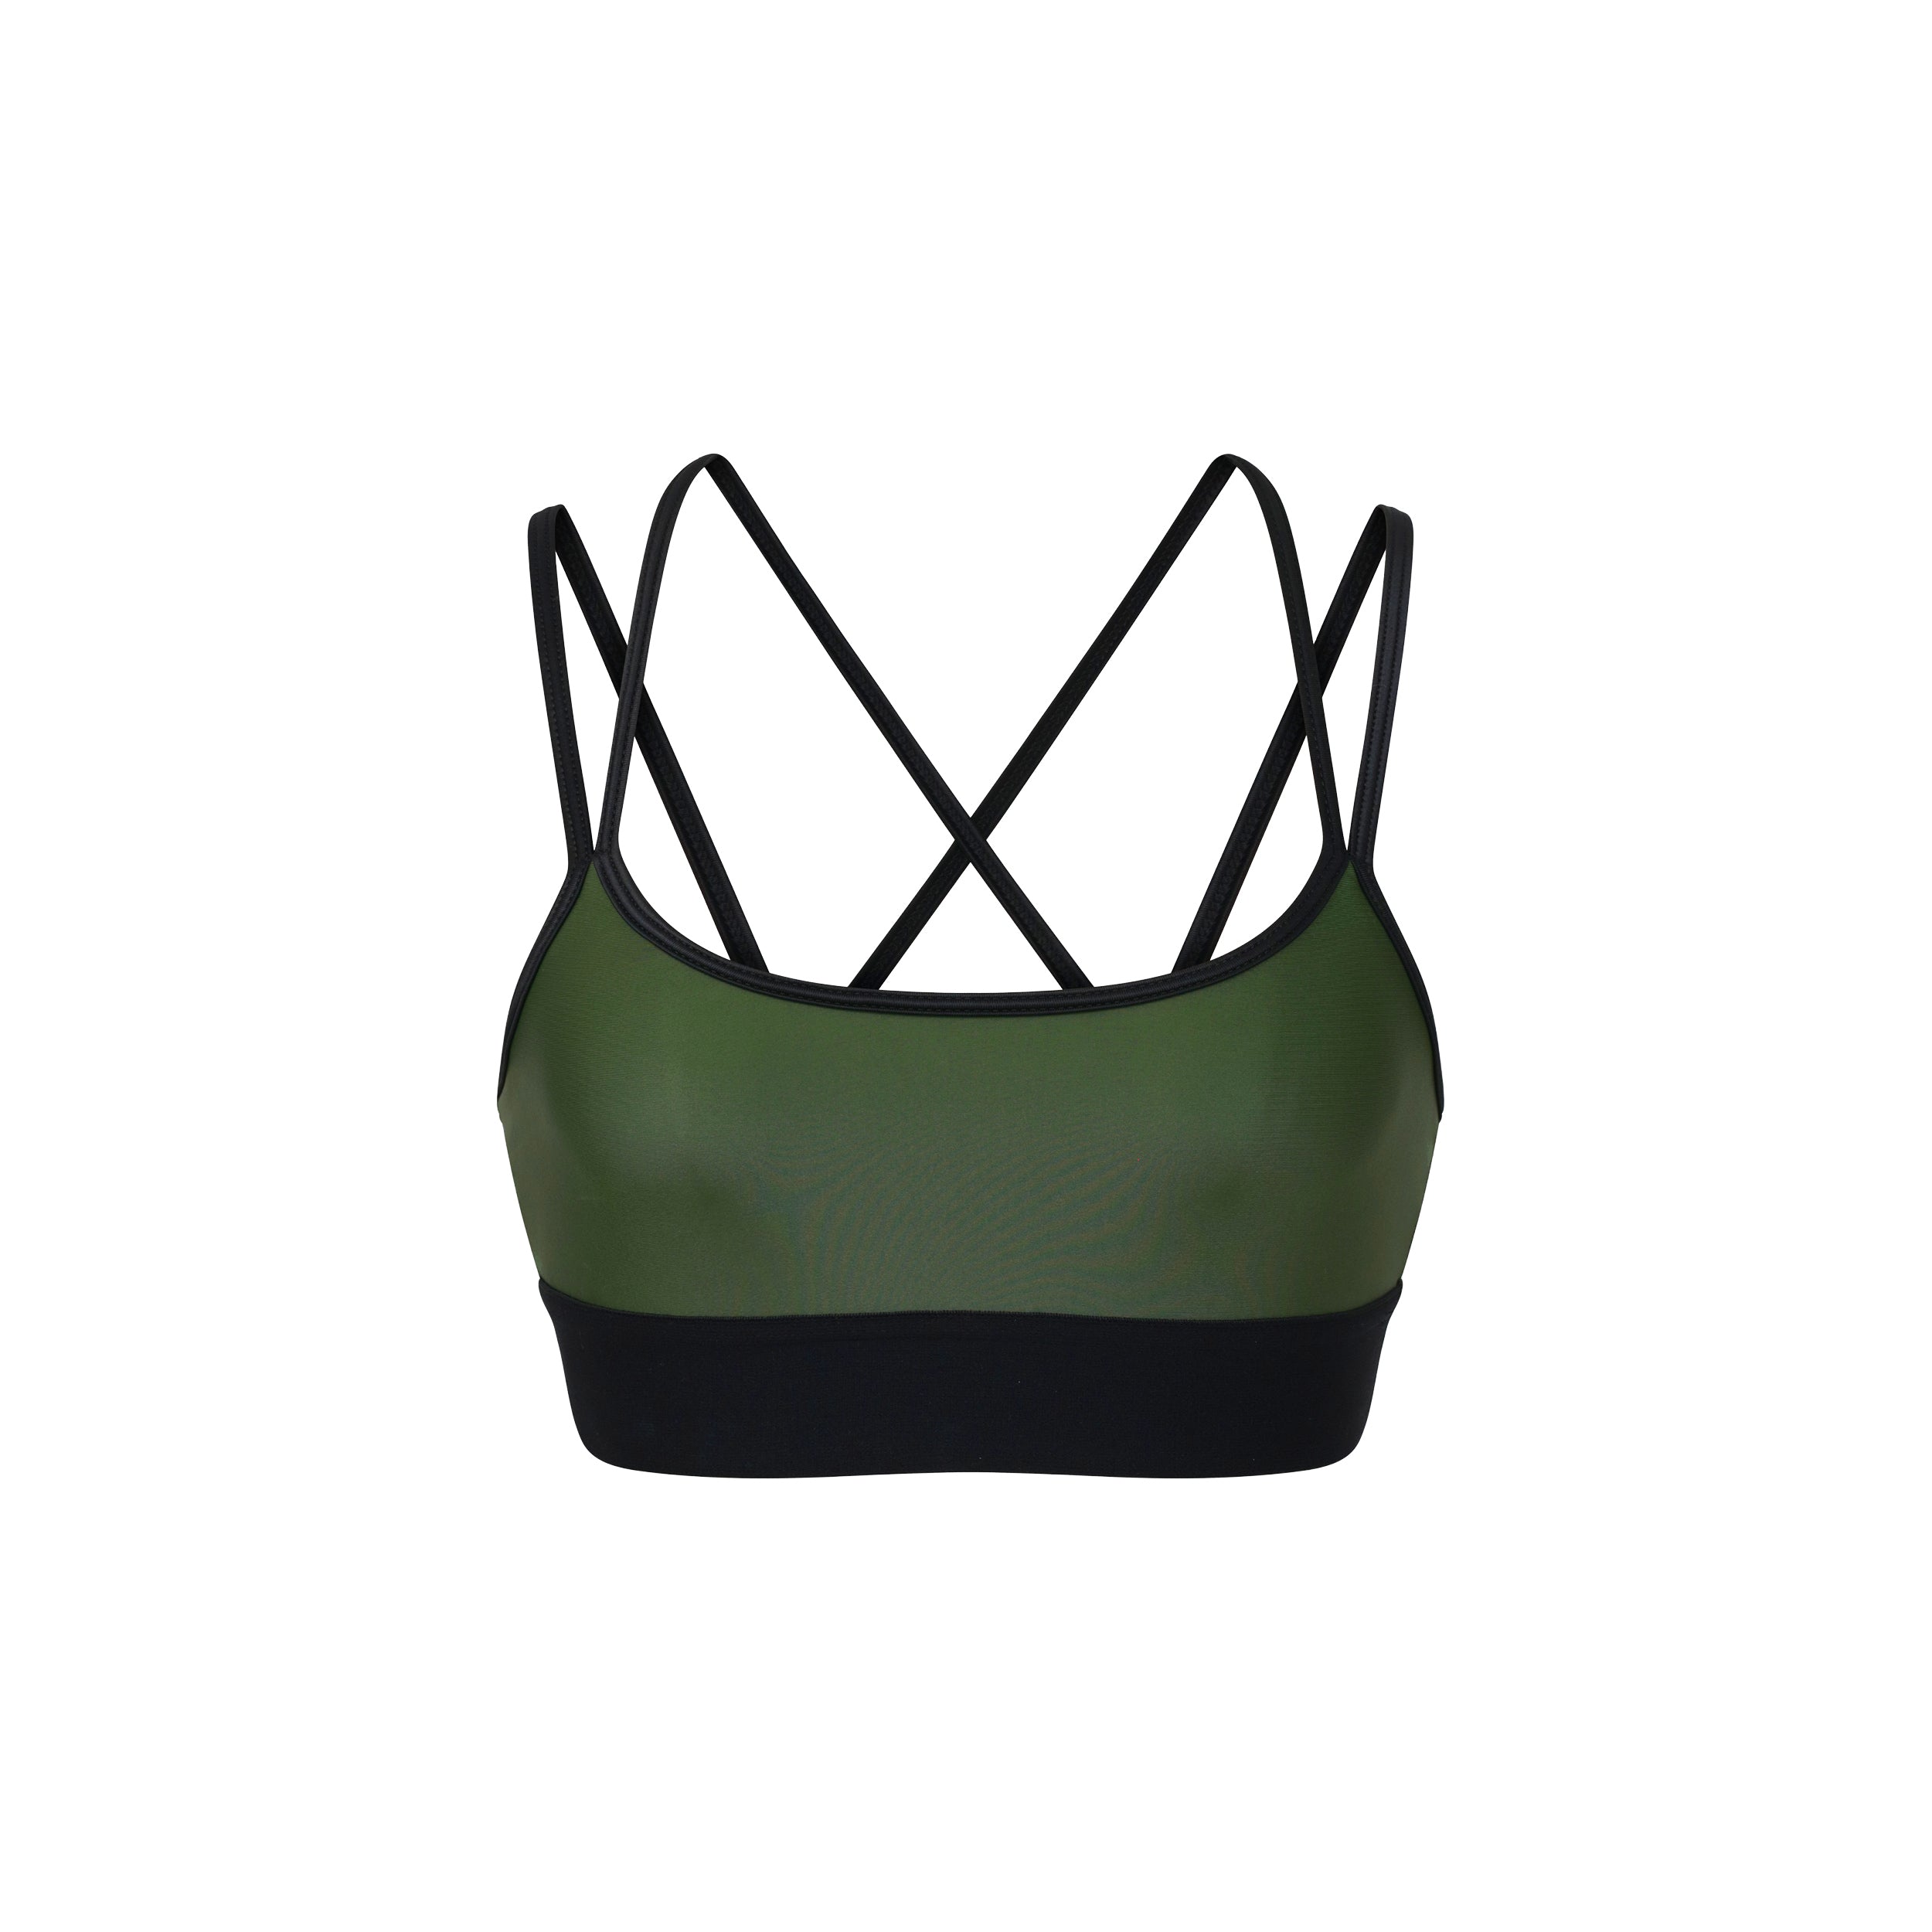 Product shot of hunter green gloss liquid sports bra featuring a scoop neckline and an alluring strappy back with a supportive elastic band